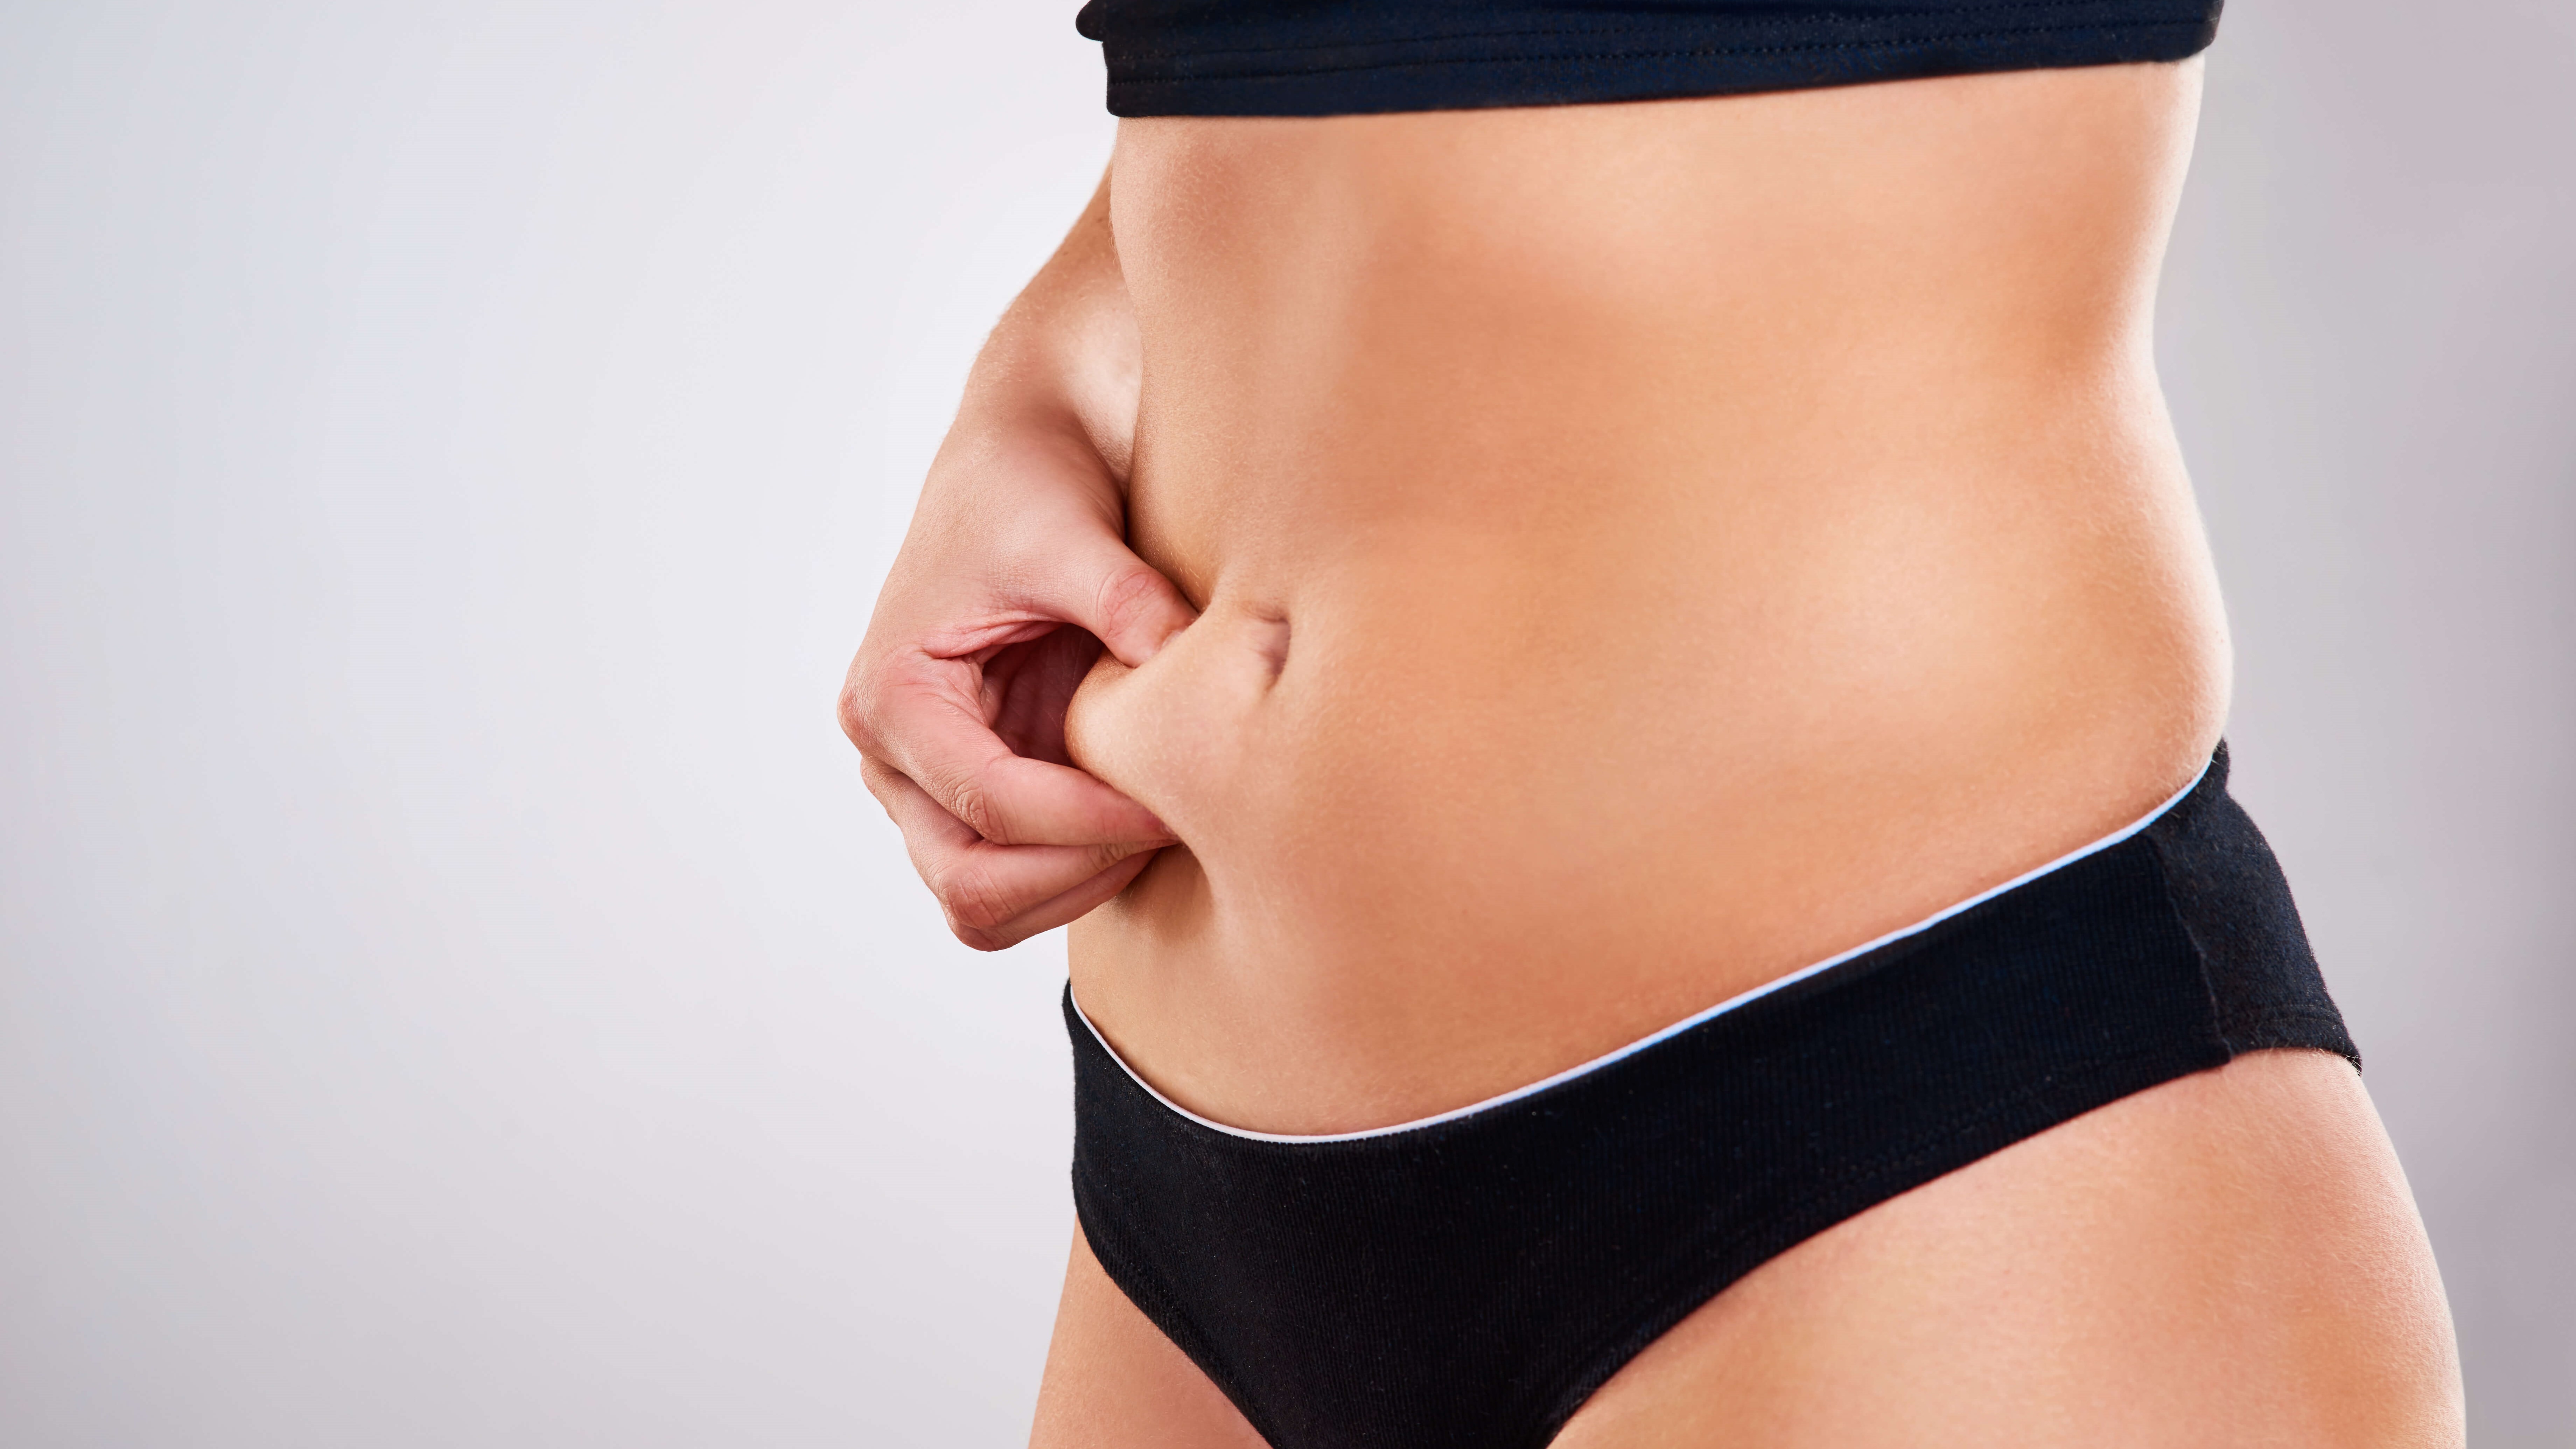 What Is An Extended Tummy Tuck?